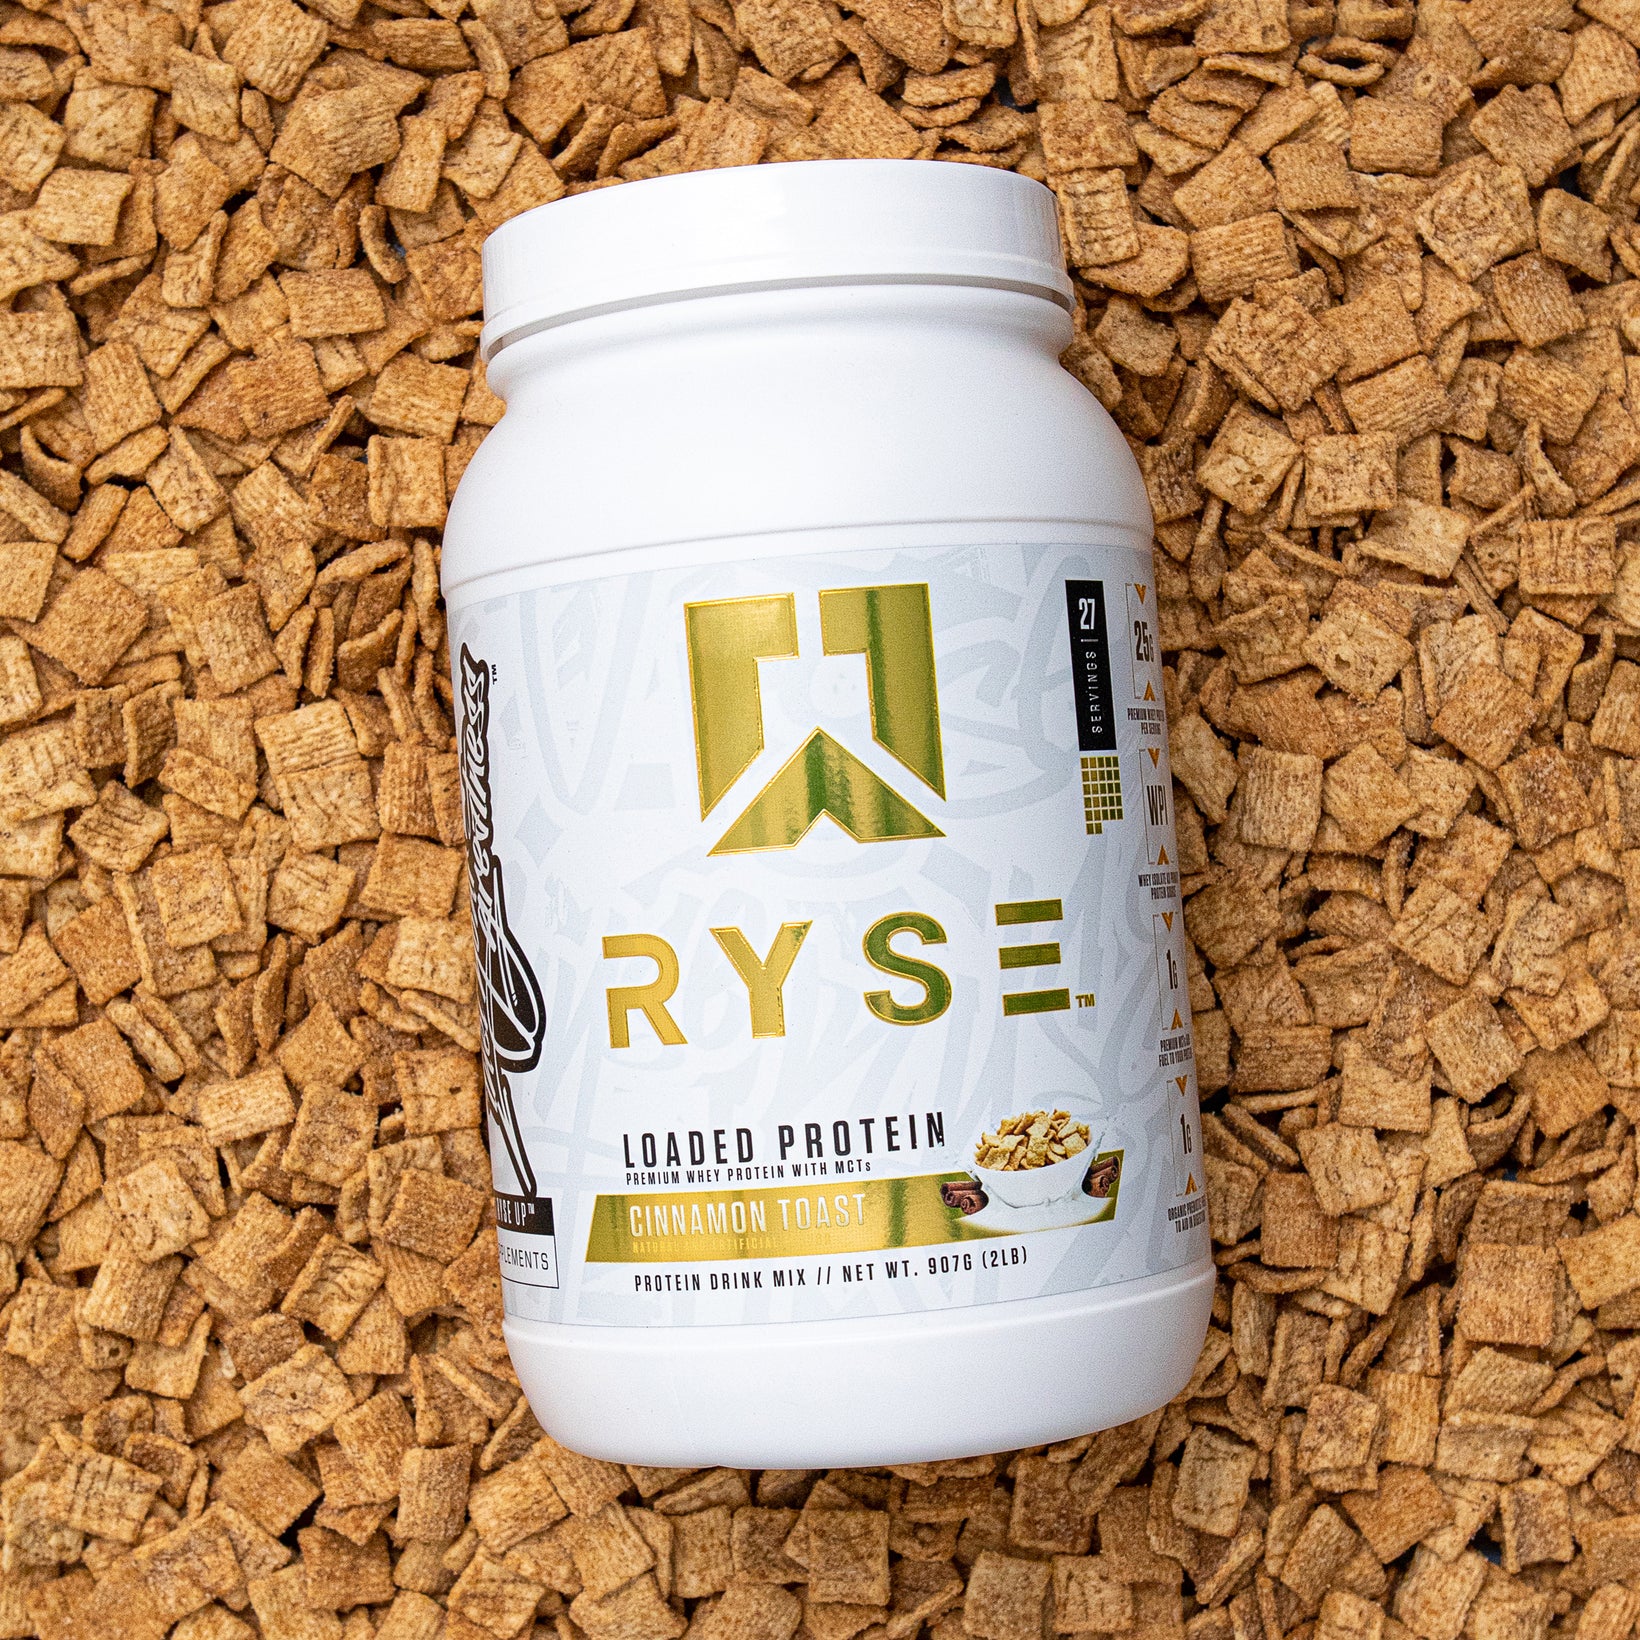 Ryse Loaded Protein Powder | 25g Whey Protein Isolate & Concentrate | with  Prebiotic Fiber & MCTs | Low Carbs & Low Sugar | 27 Servings (Vanilla